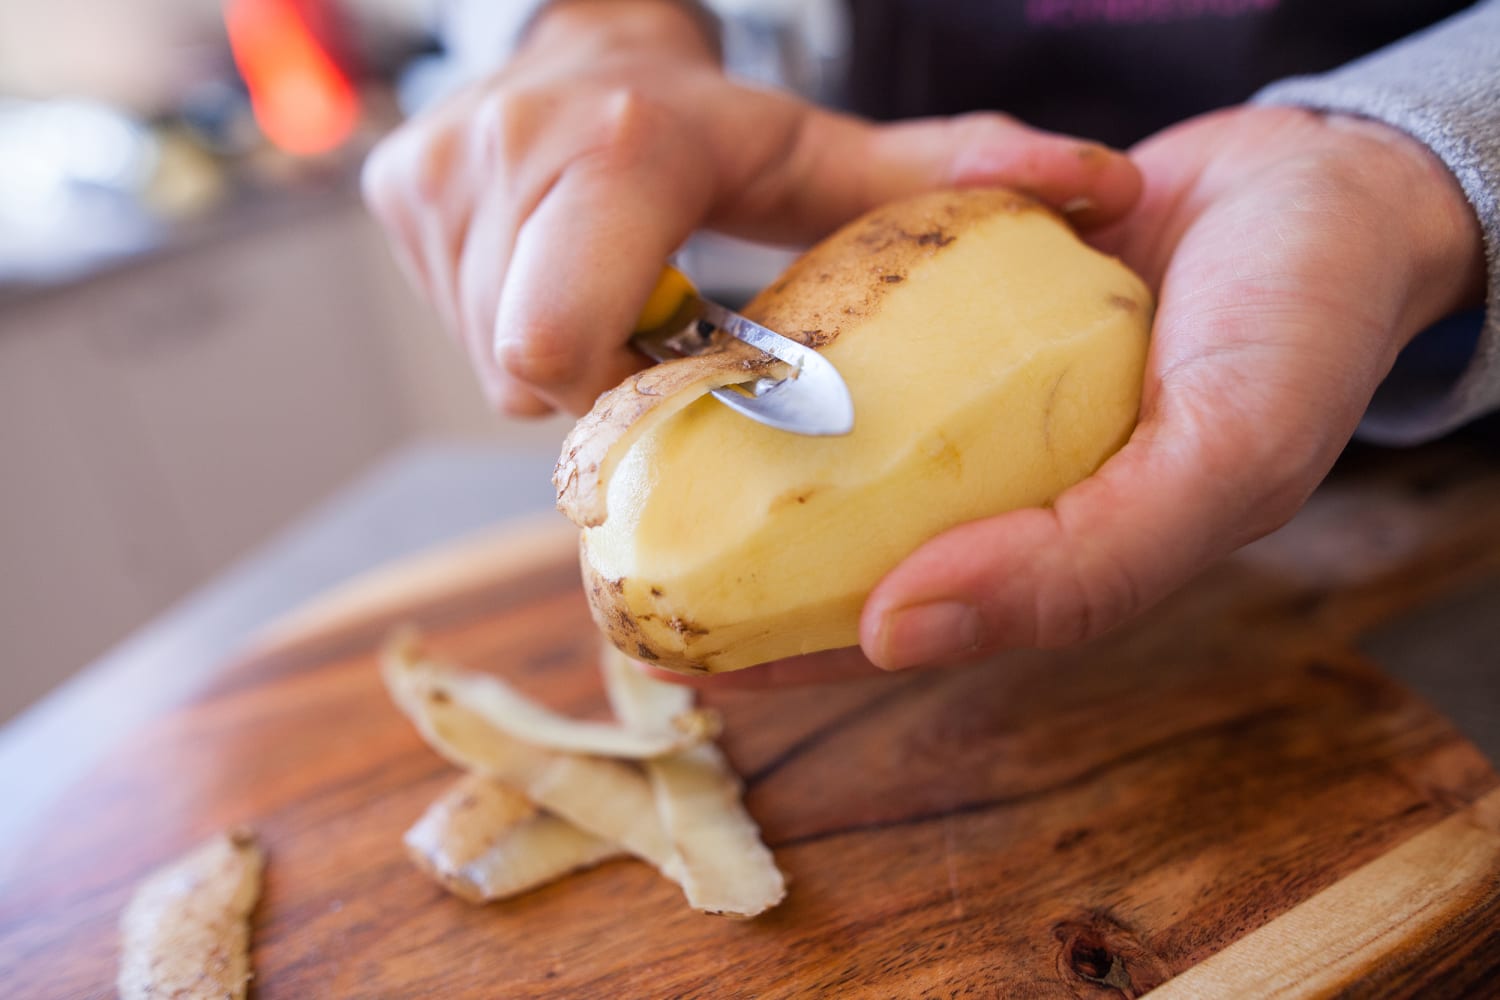 This Electric Potato Peeler Will Help Make Holiday Food Prep So Easy